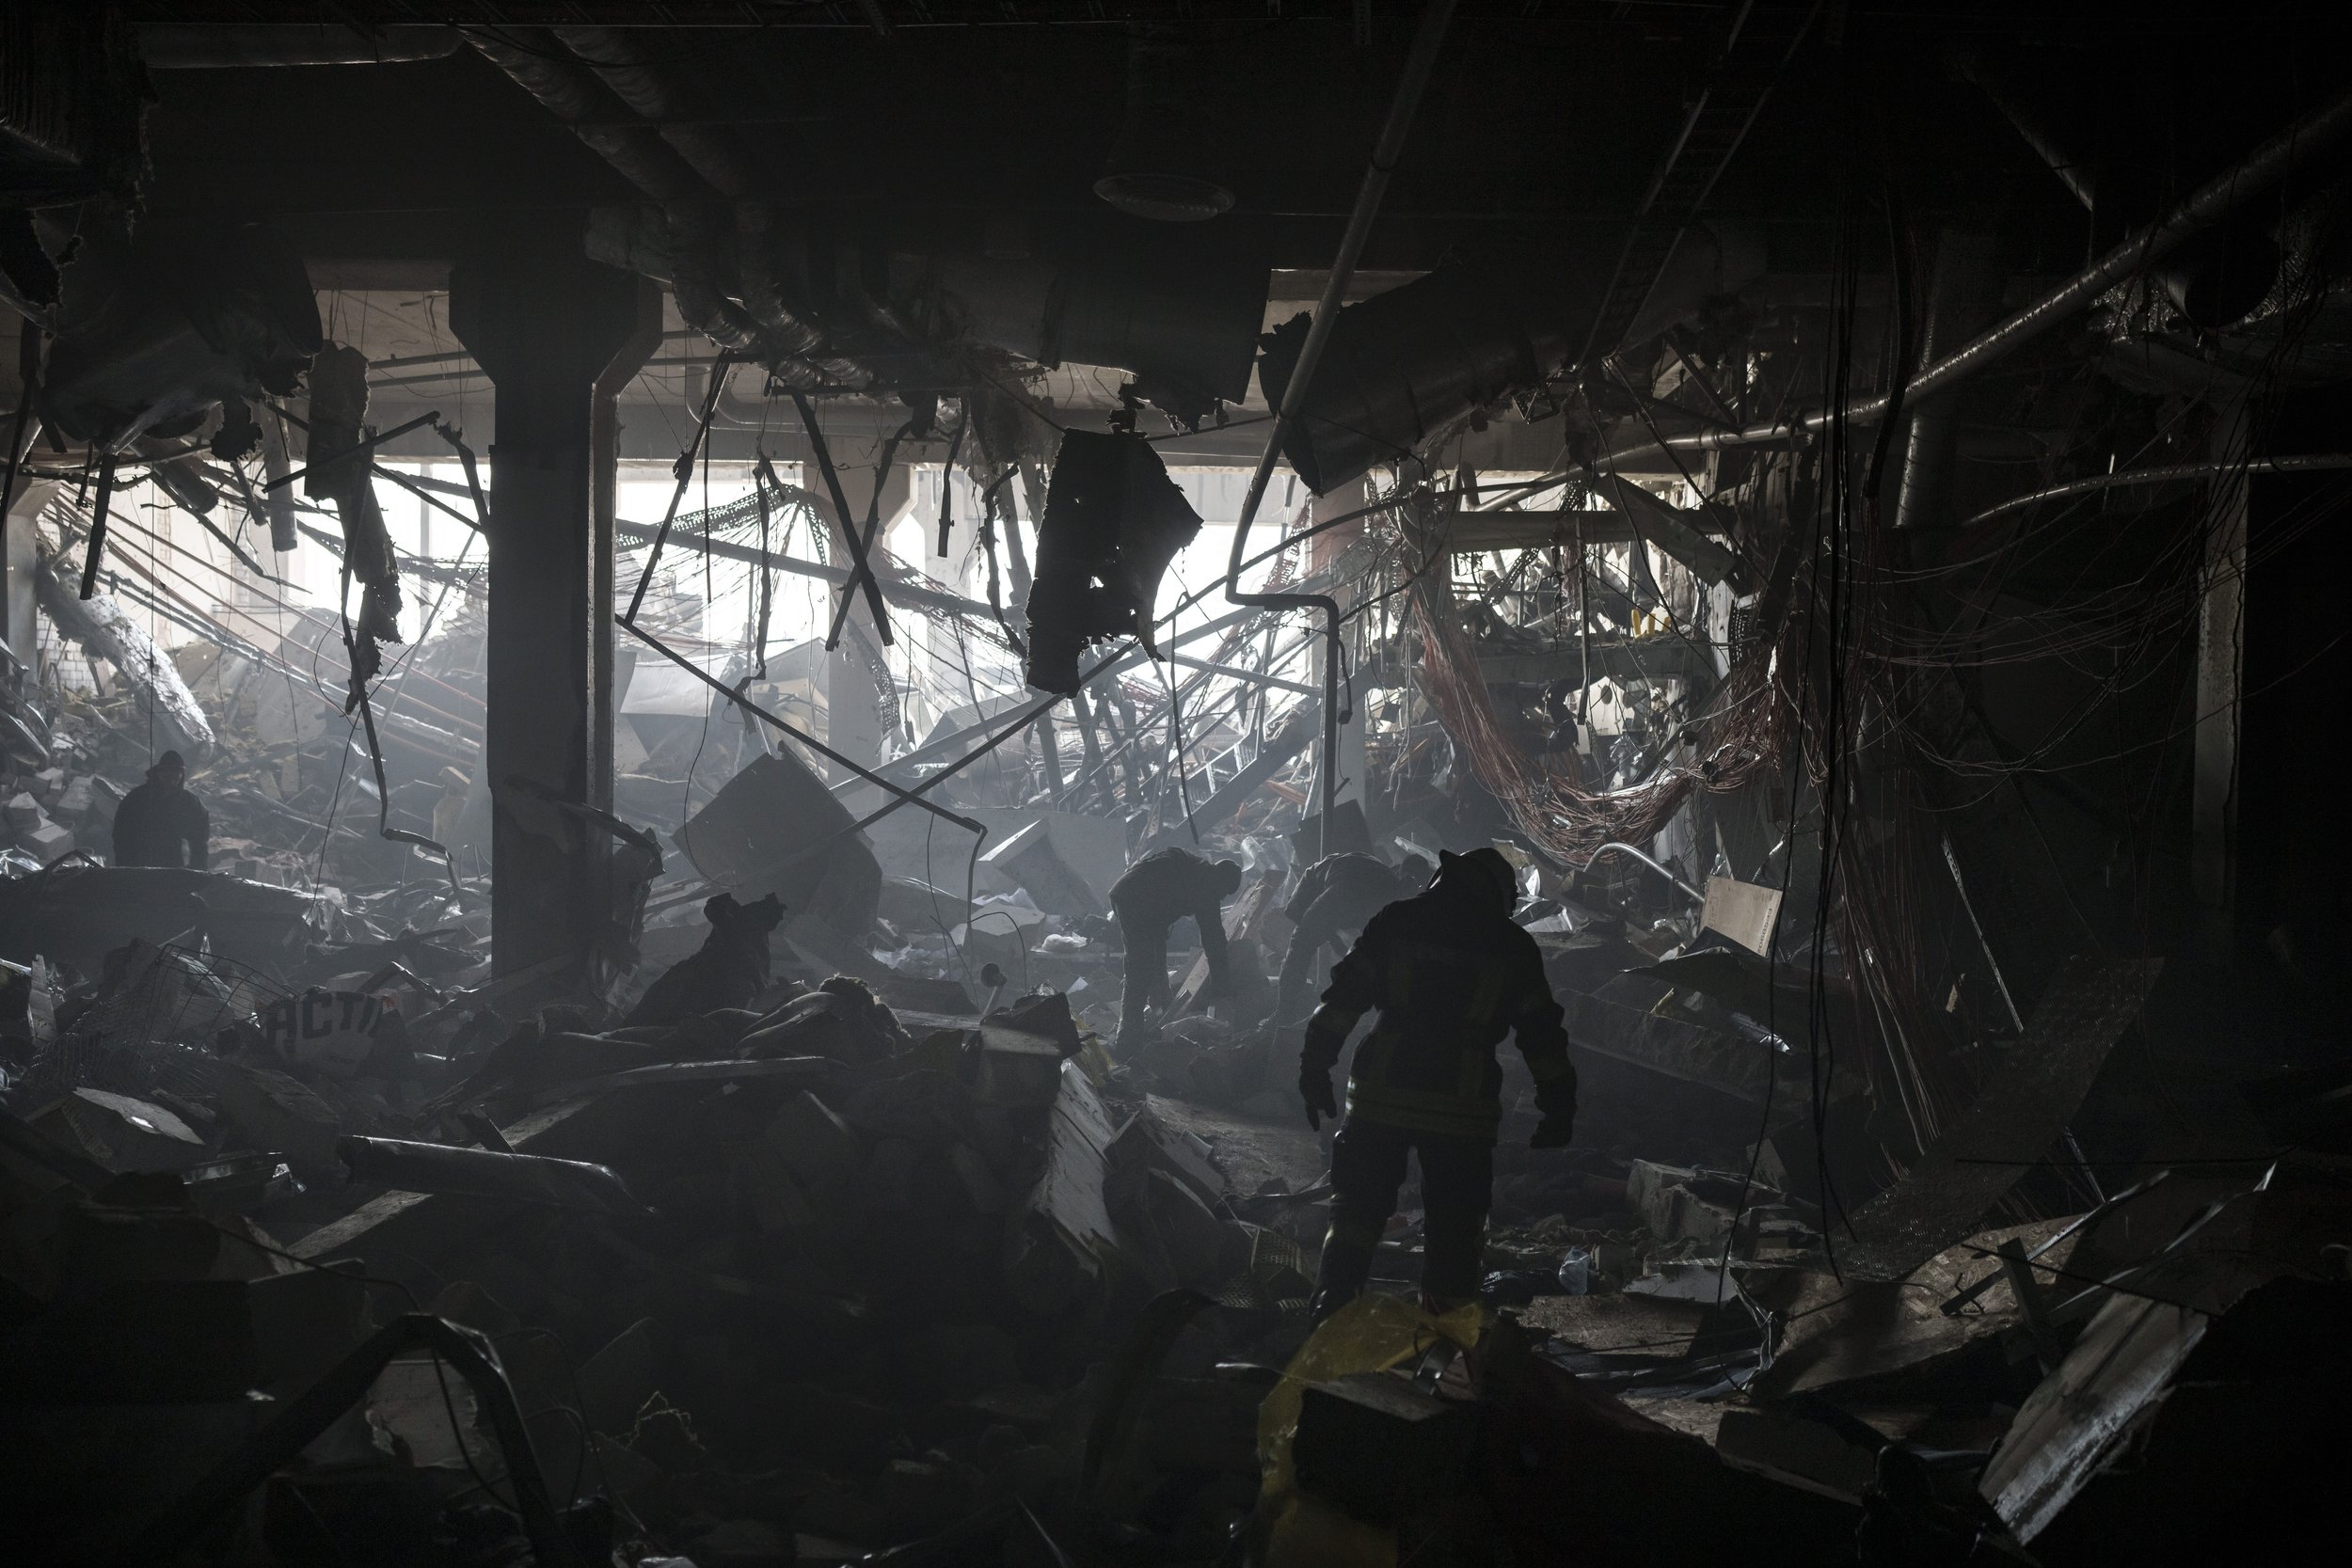  Ukrainian firefighters and servicemen search for people under debris inside a shopping center after bombing in Kyiv, Ukraine, Monday, March 21, 2022. (AP Photo/Felipe Dana) 